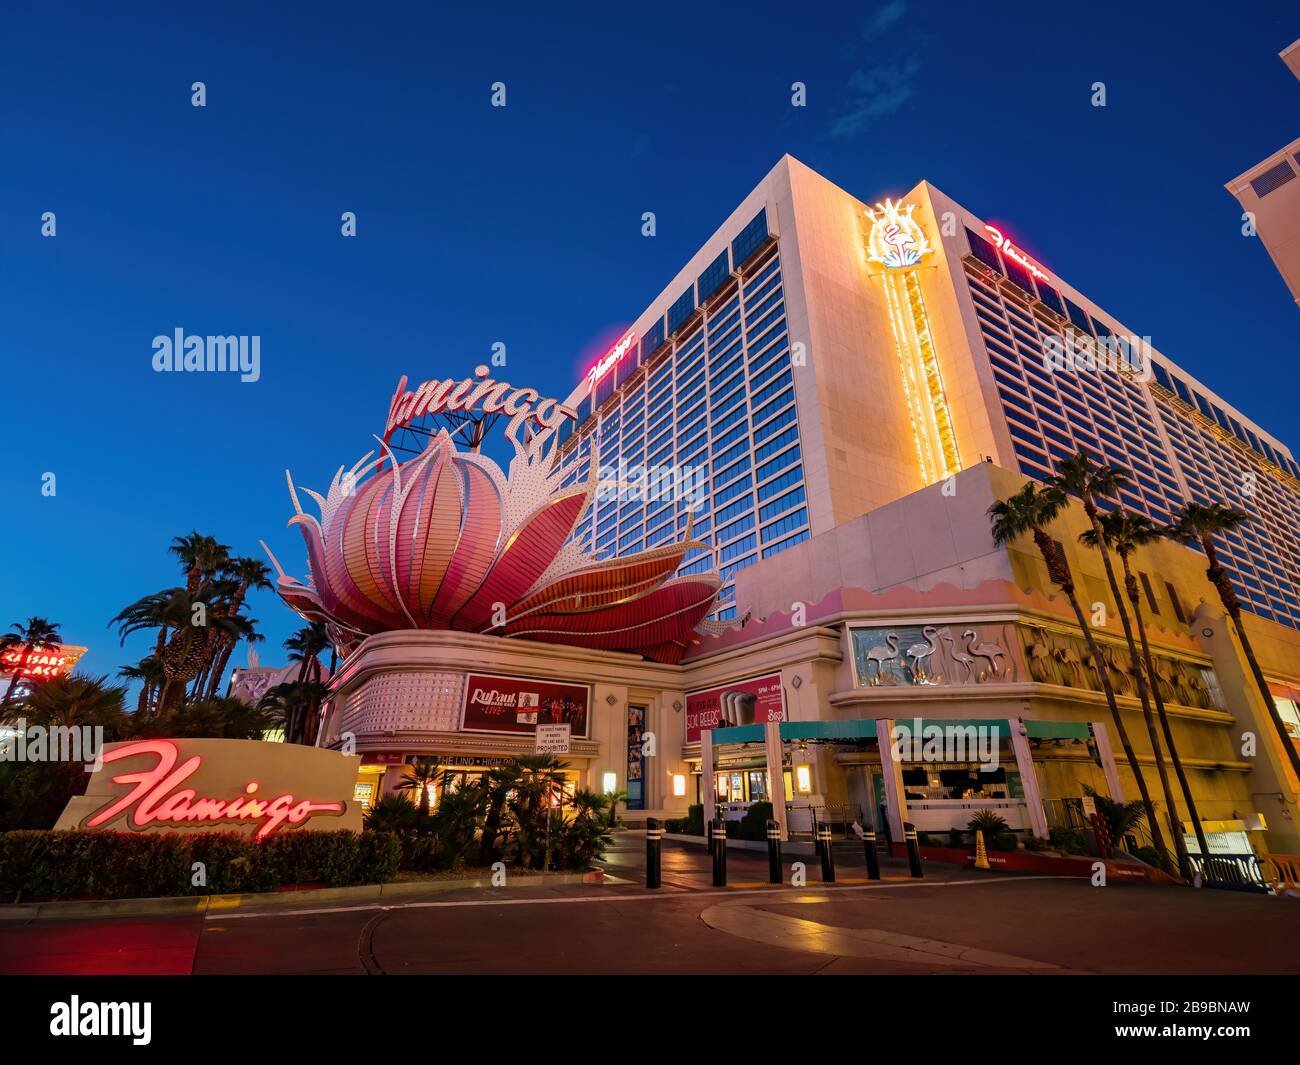 Las Vegas, MAR 23, 2020 - Dusk special lockdown cityscape of the famous Strip with Flamingo Casino Stock Photo